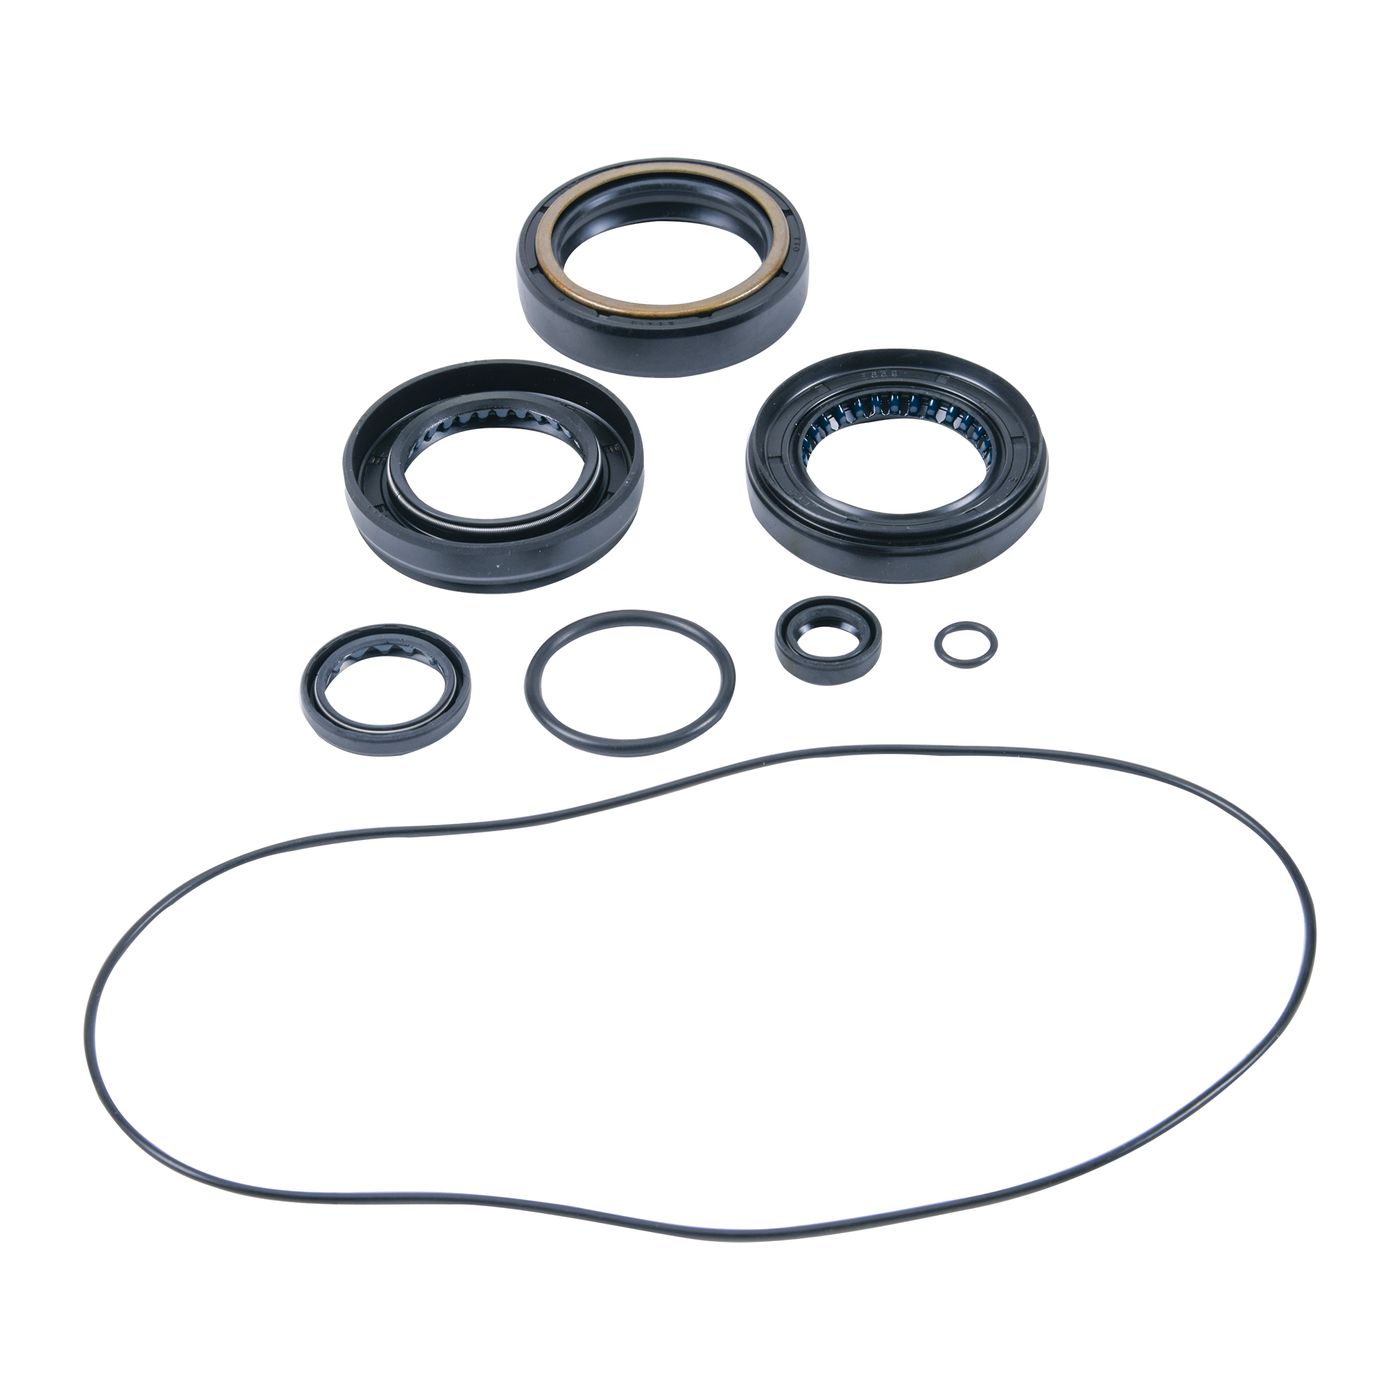 Wrp Diff Seal Kits - WRP252136-5 image